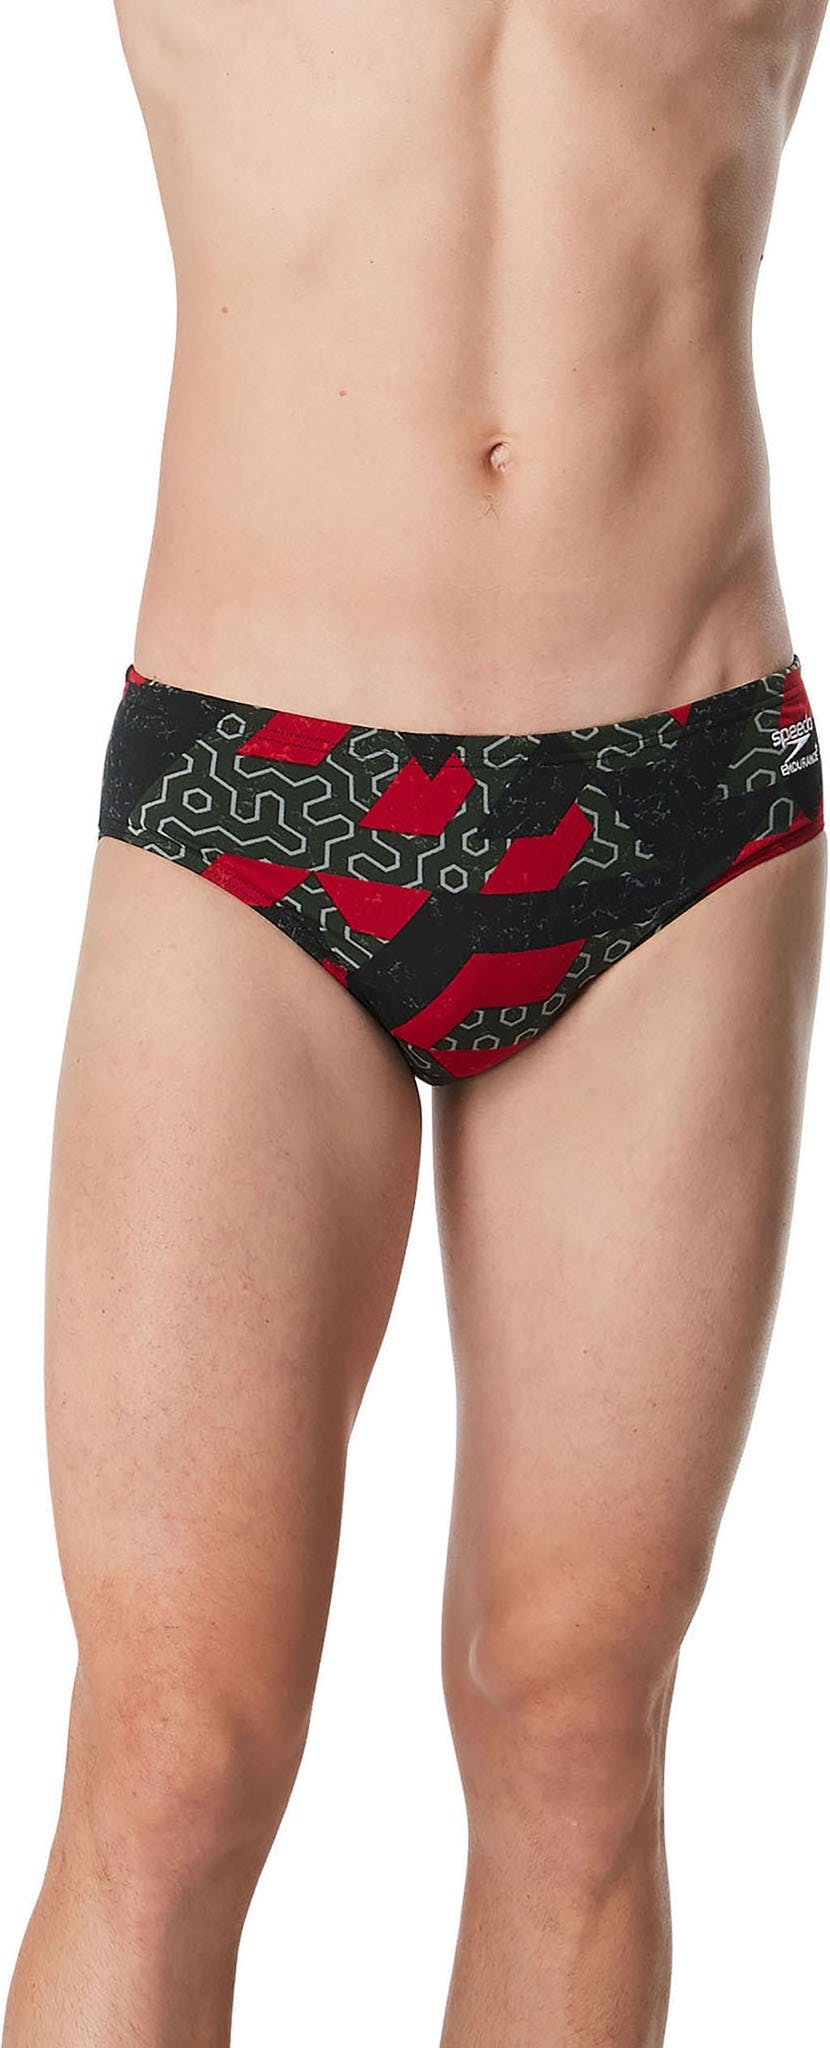 Product image for Ruse Blocks Brief - Men's